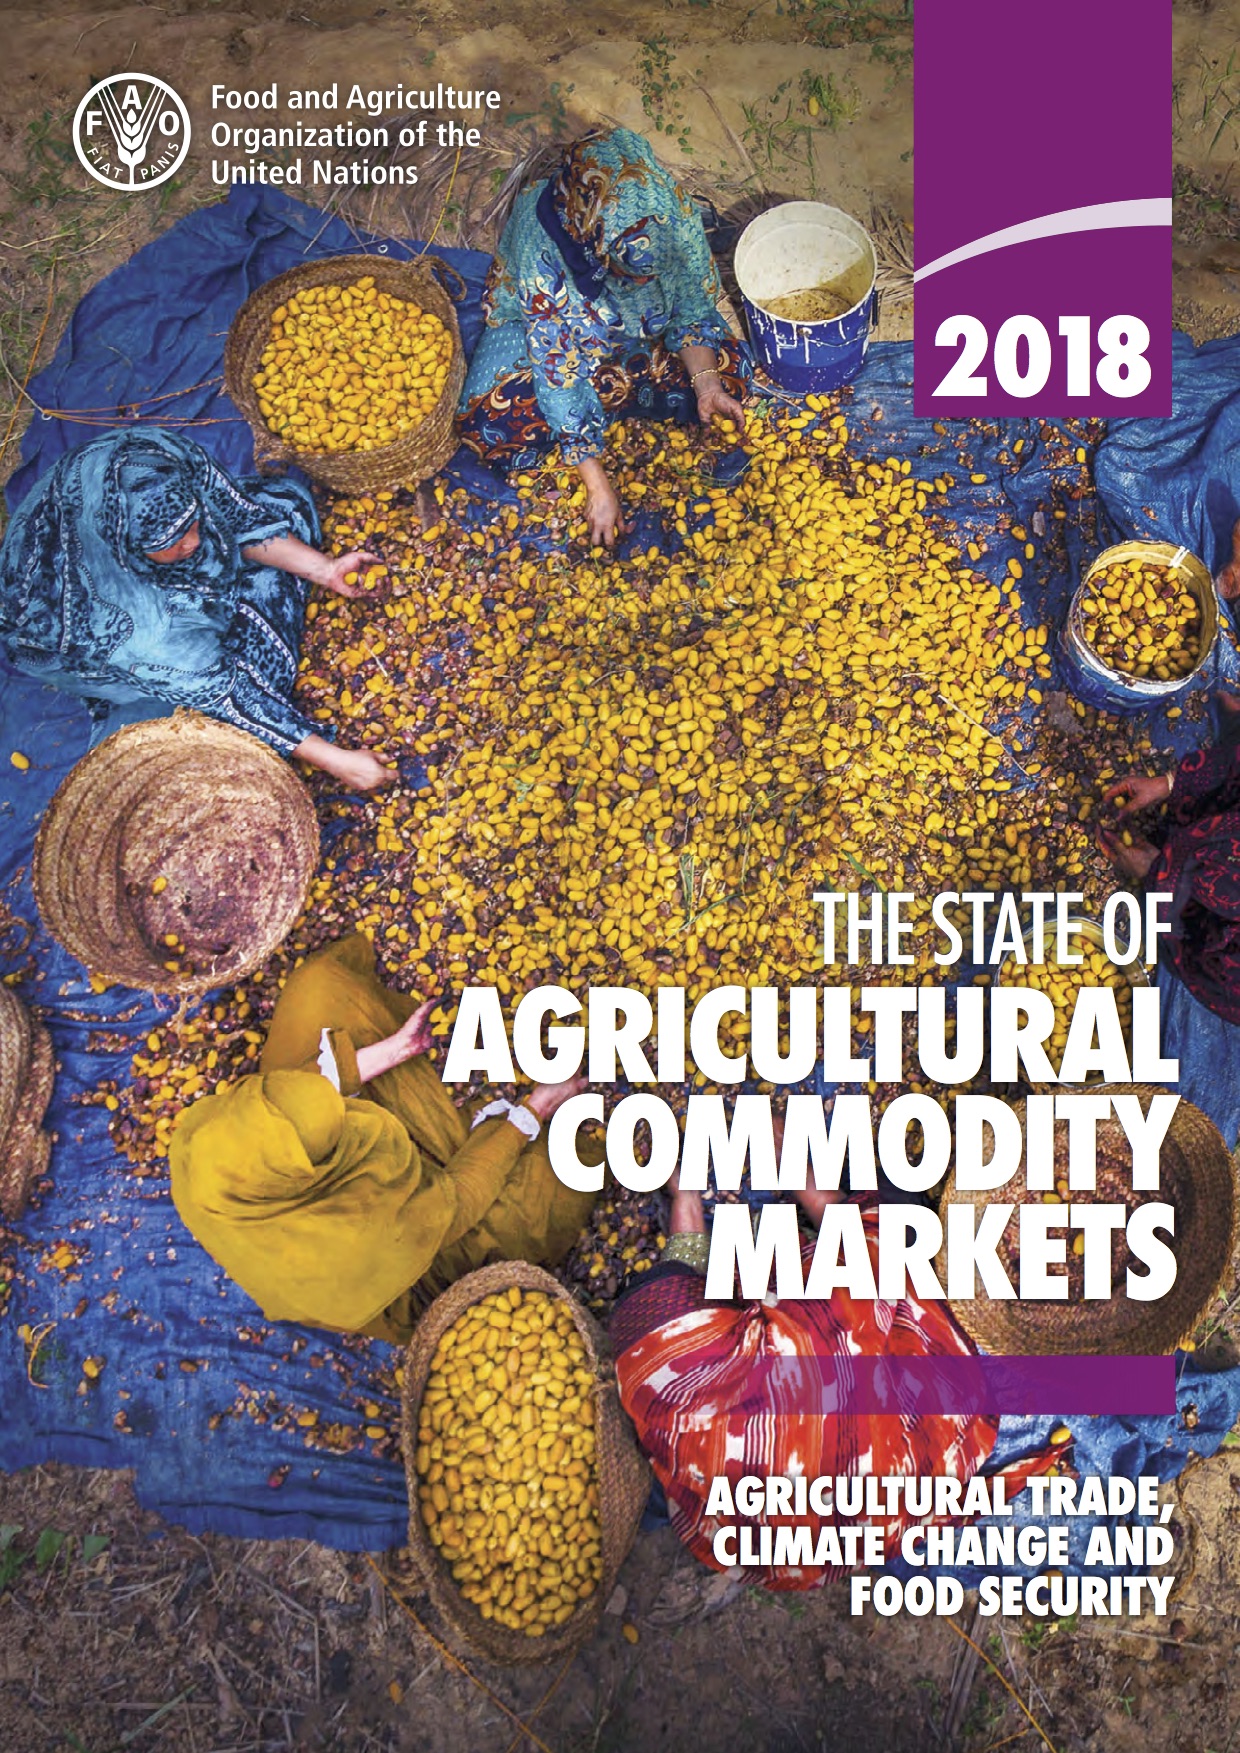 FAO. 2018. The State of Agricultural Commodity Markets 2018. Agricultural trade, climate change and food security. Rome. Licence: CC BY-NC-SA 3.0 IGO